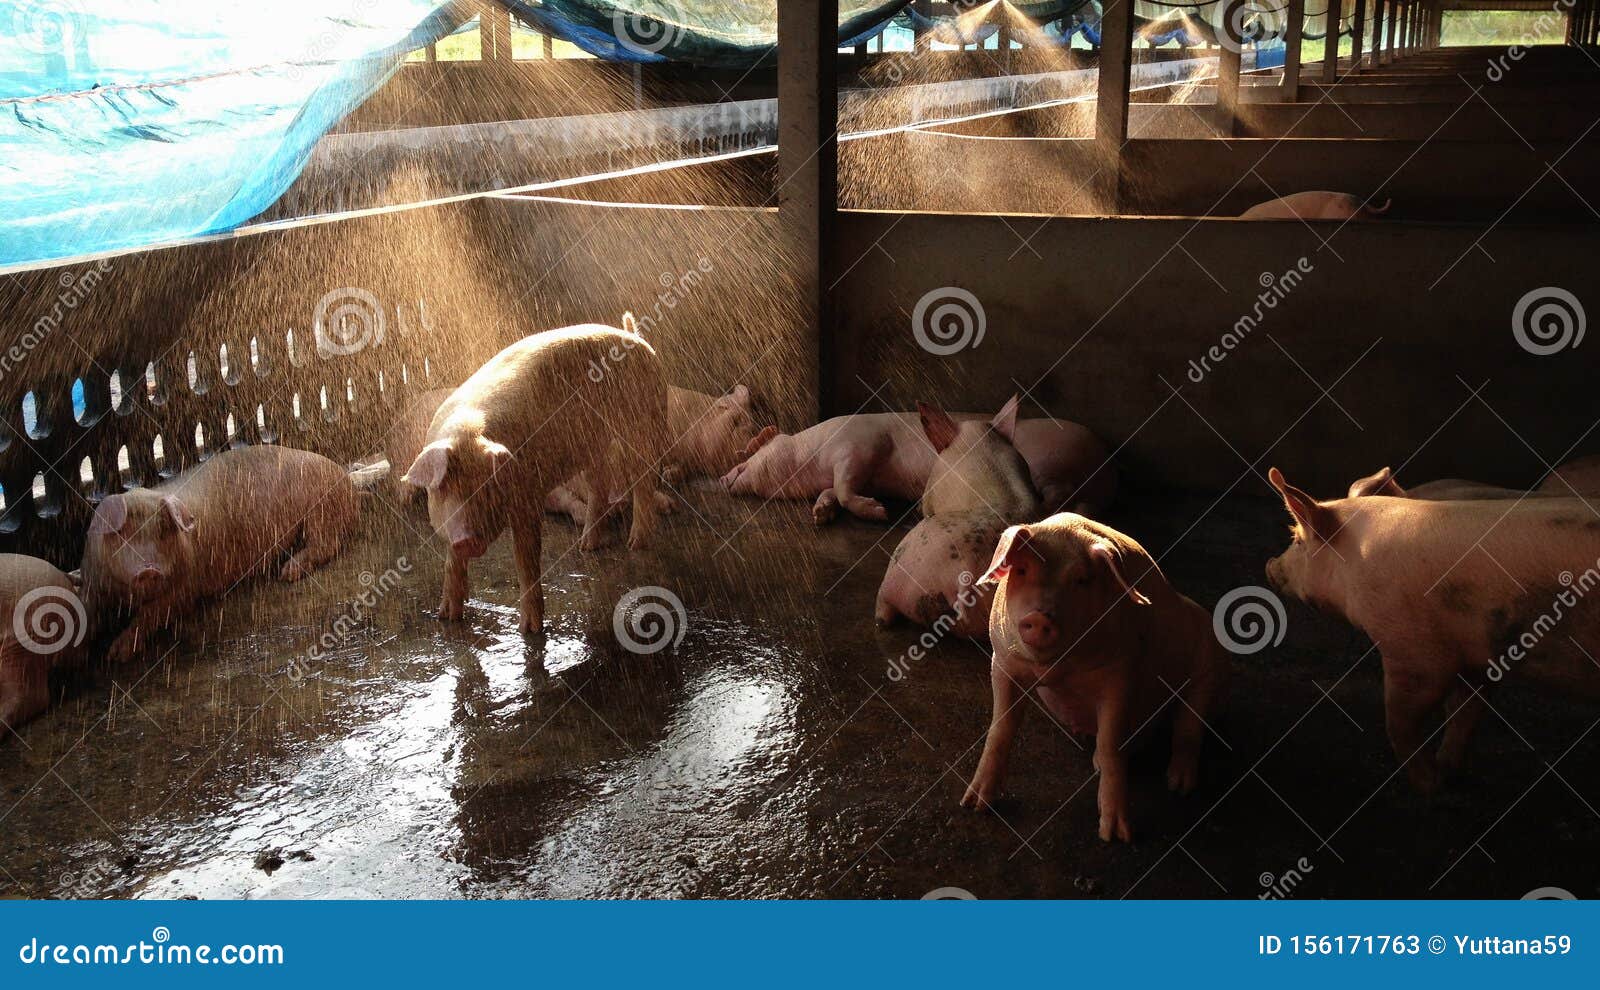 https://thumbs.dreamstime.com/z/happy-fattening-pig-big-commercial-swine-farm-healthy-growing-pigs-water-spraying-reduce-stress-form-hot-climate-156171763.jpg